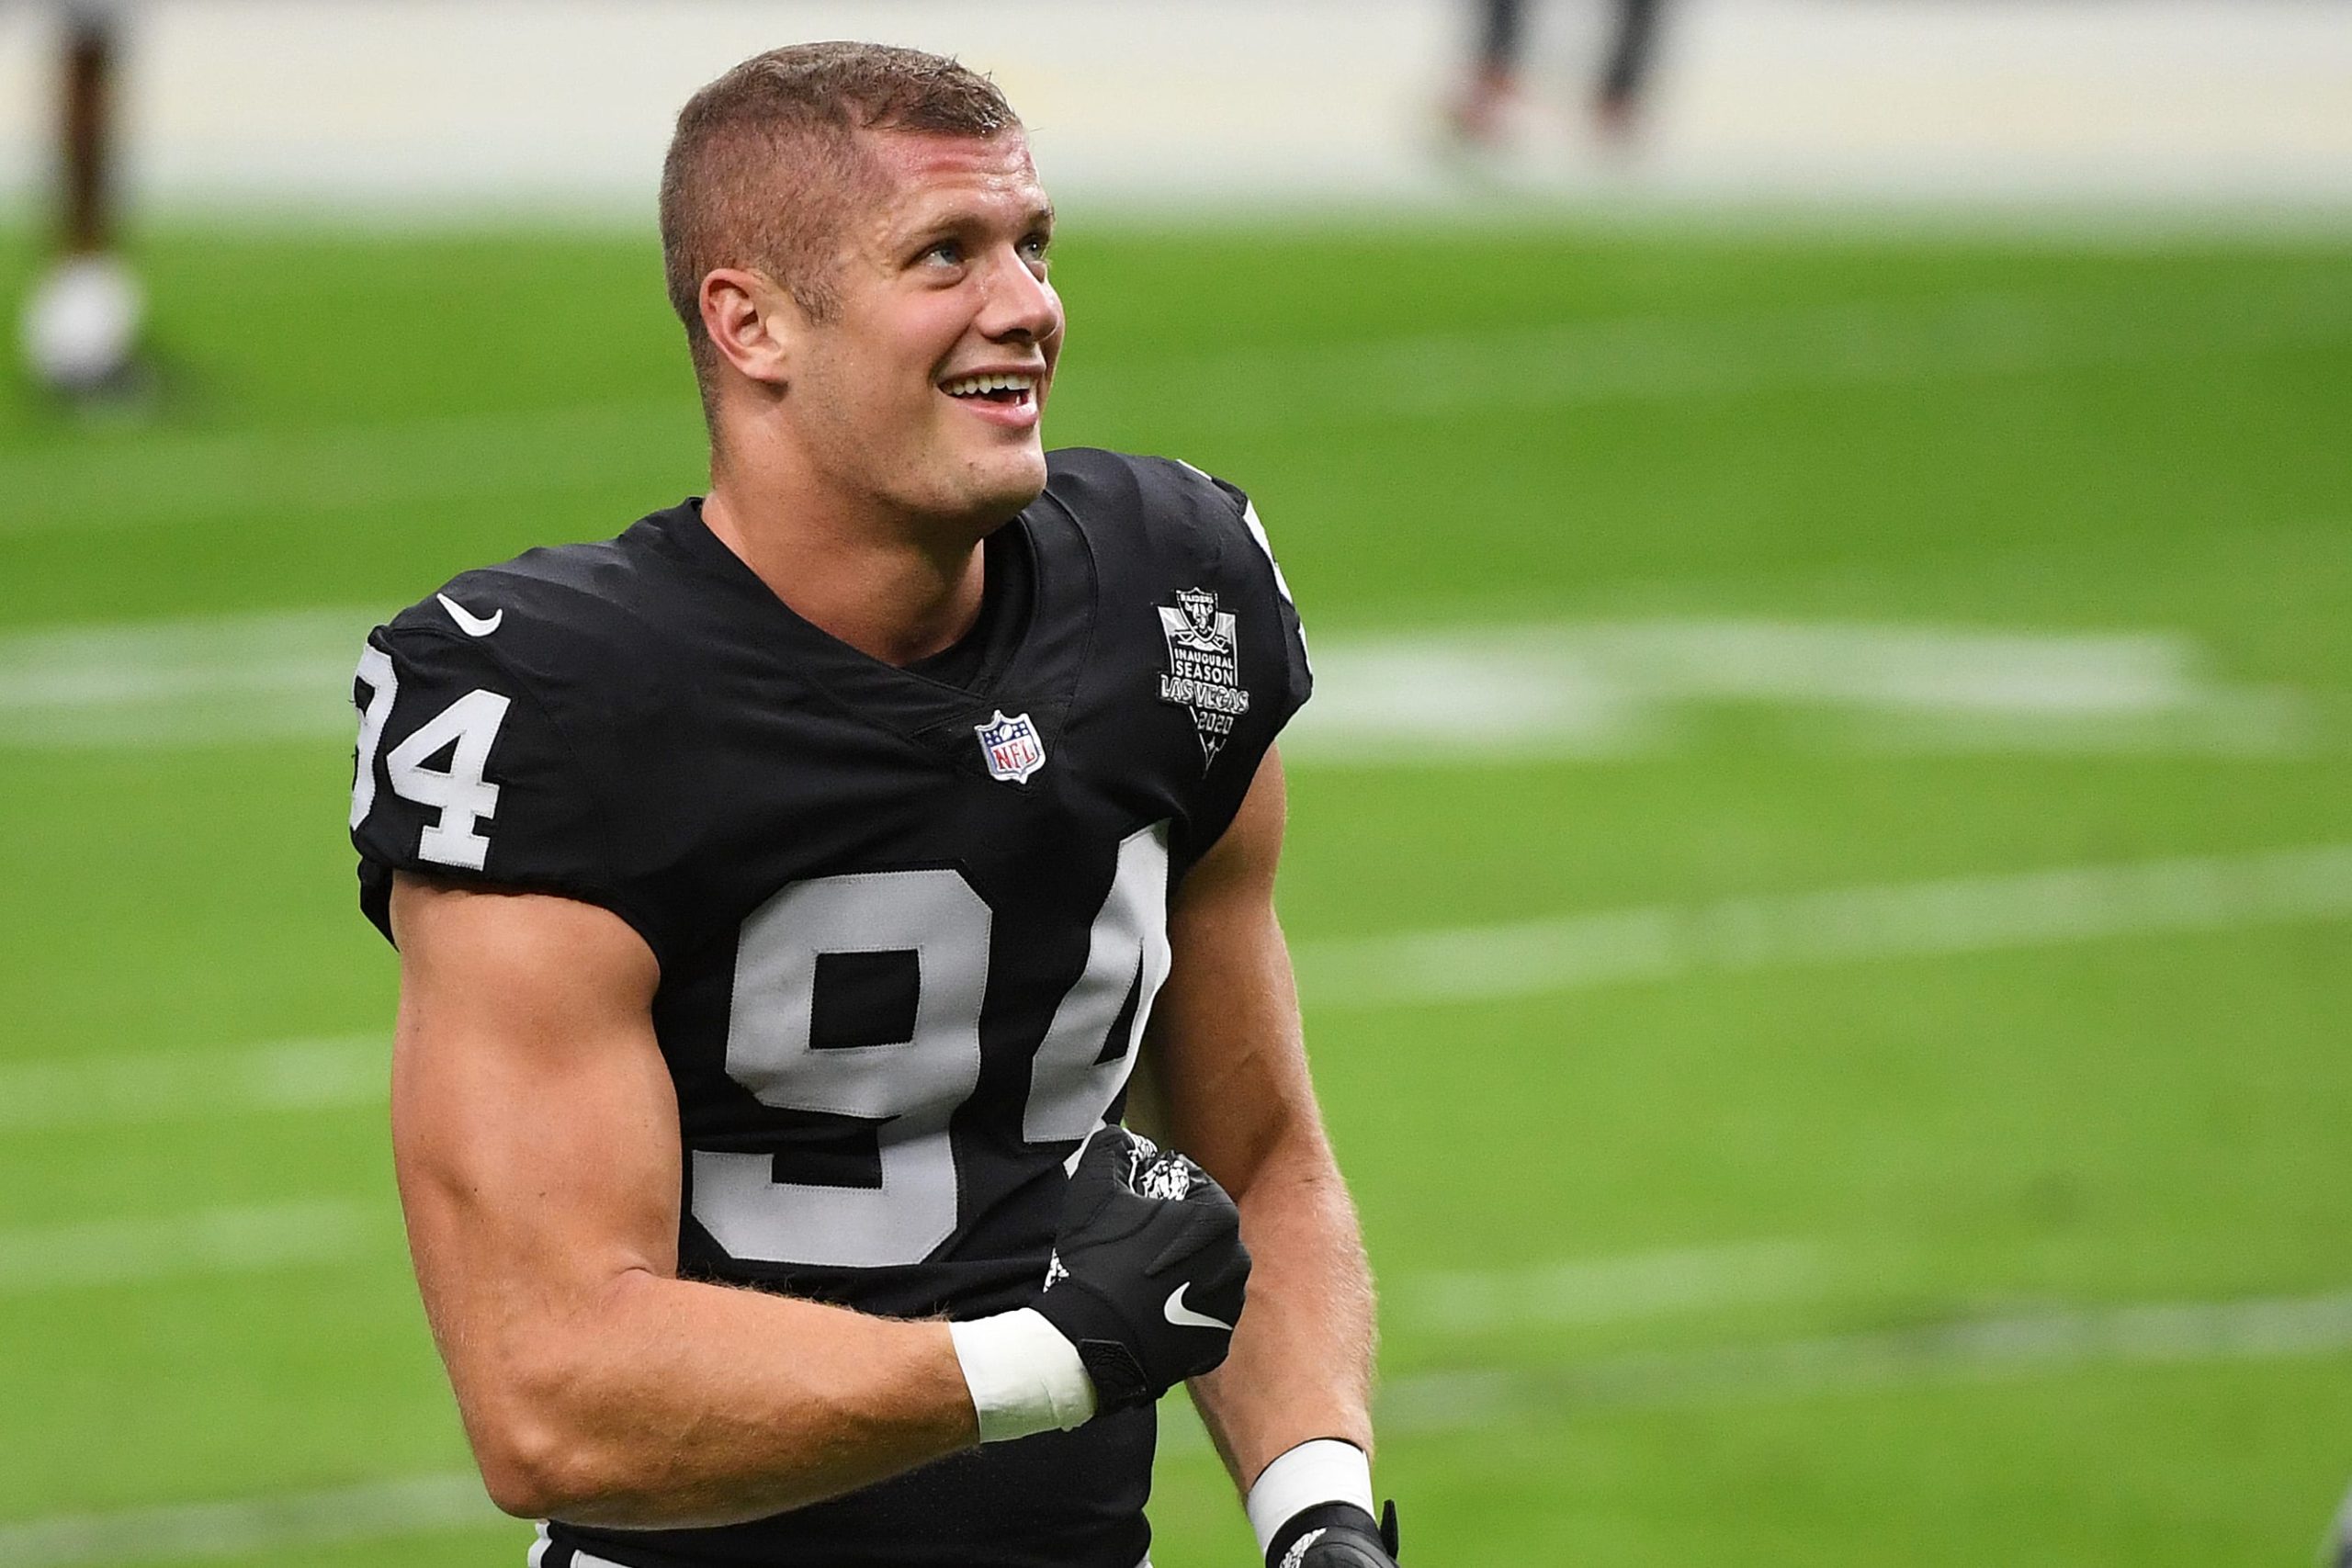 Carl Nassib pledges $100,000 to a project for LGBTQ youth mental health.